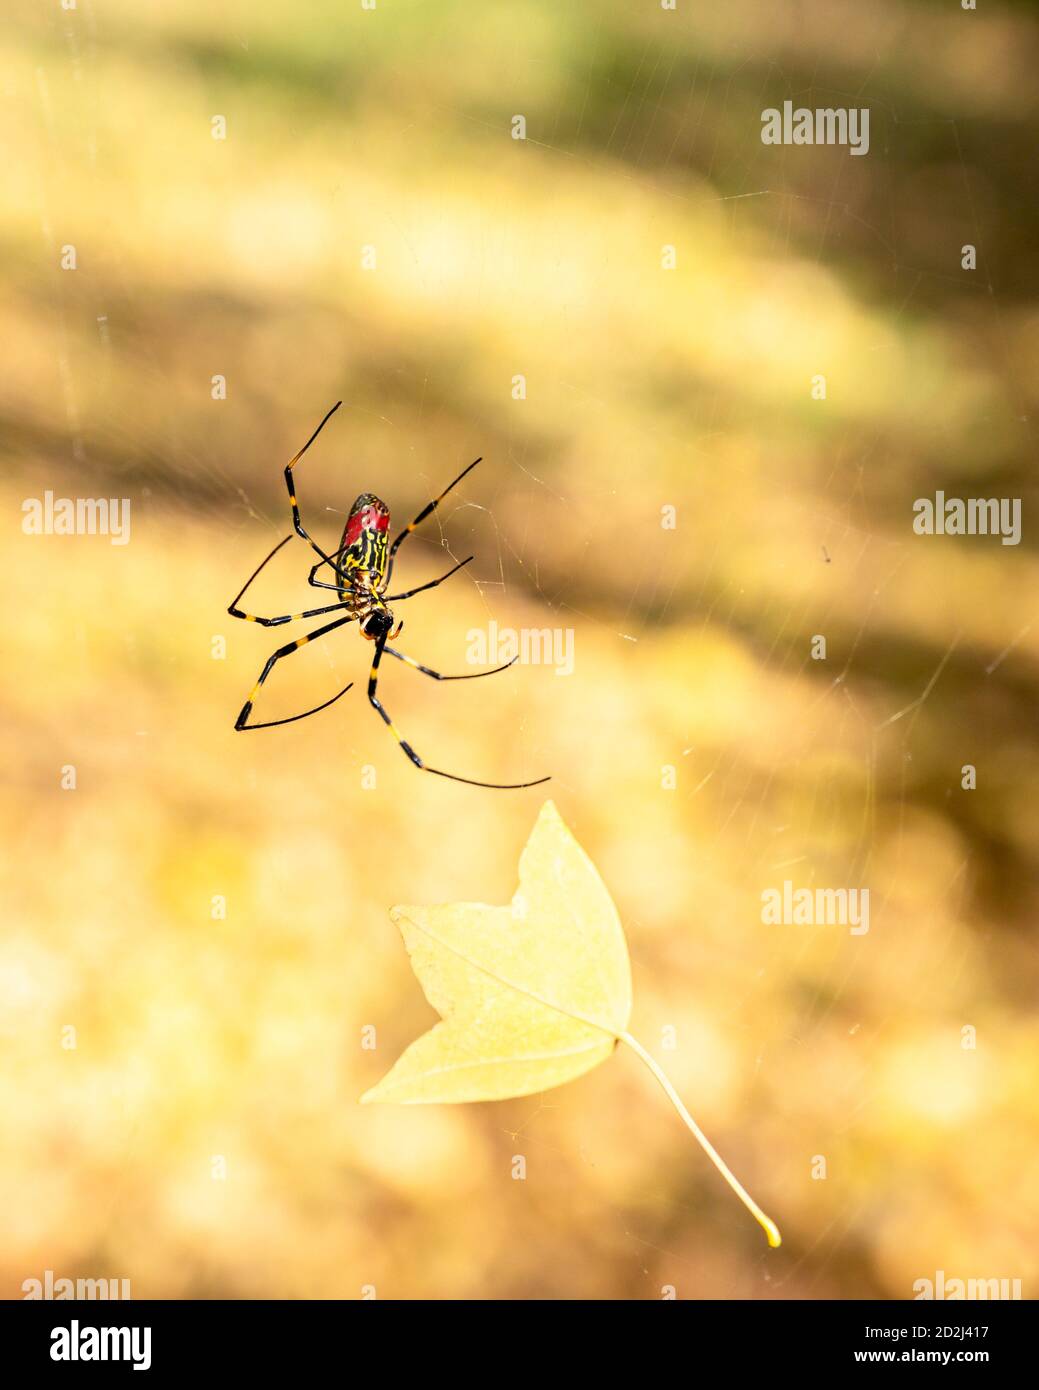 Closeup of a Japanese Joro spider trying to remove autumn leaf from his web. Stock Photo